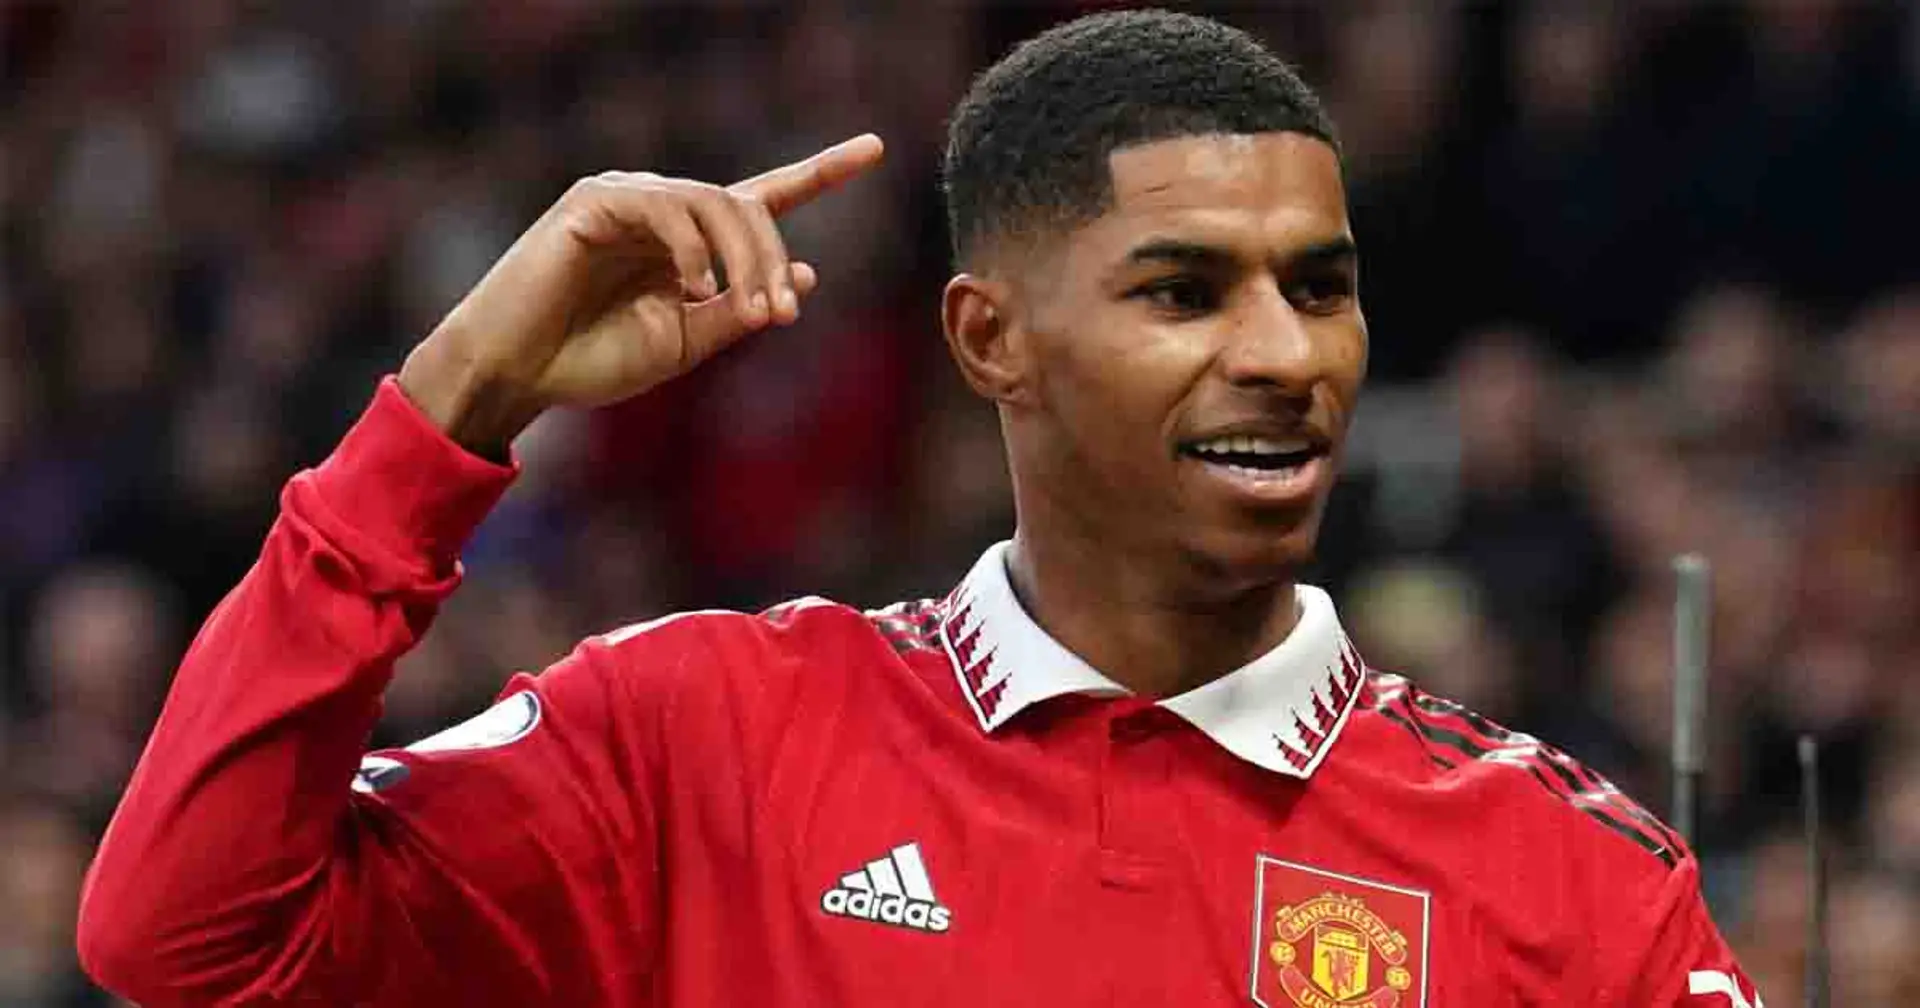 Man United ready to make Rashford 'one of the highest earners' with new contract